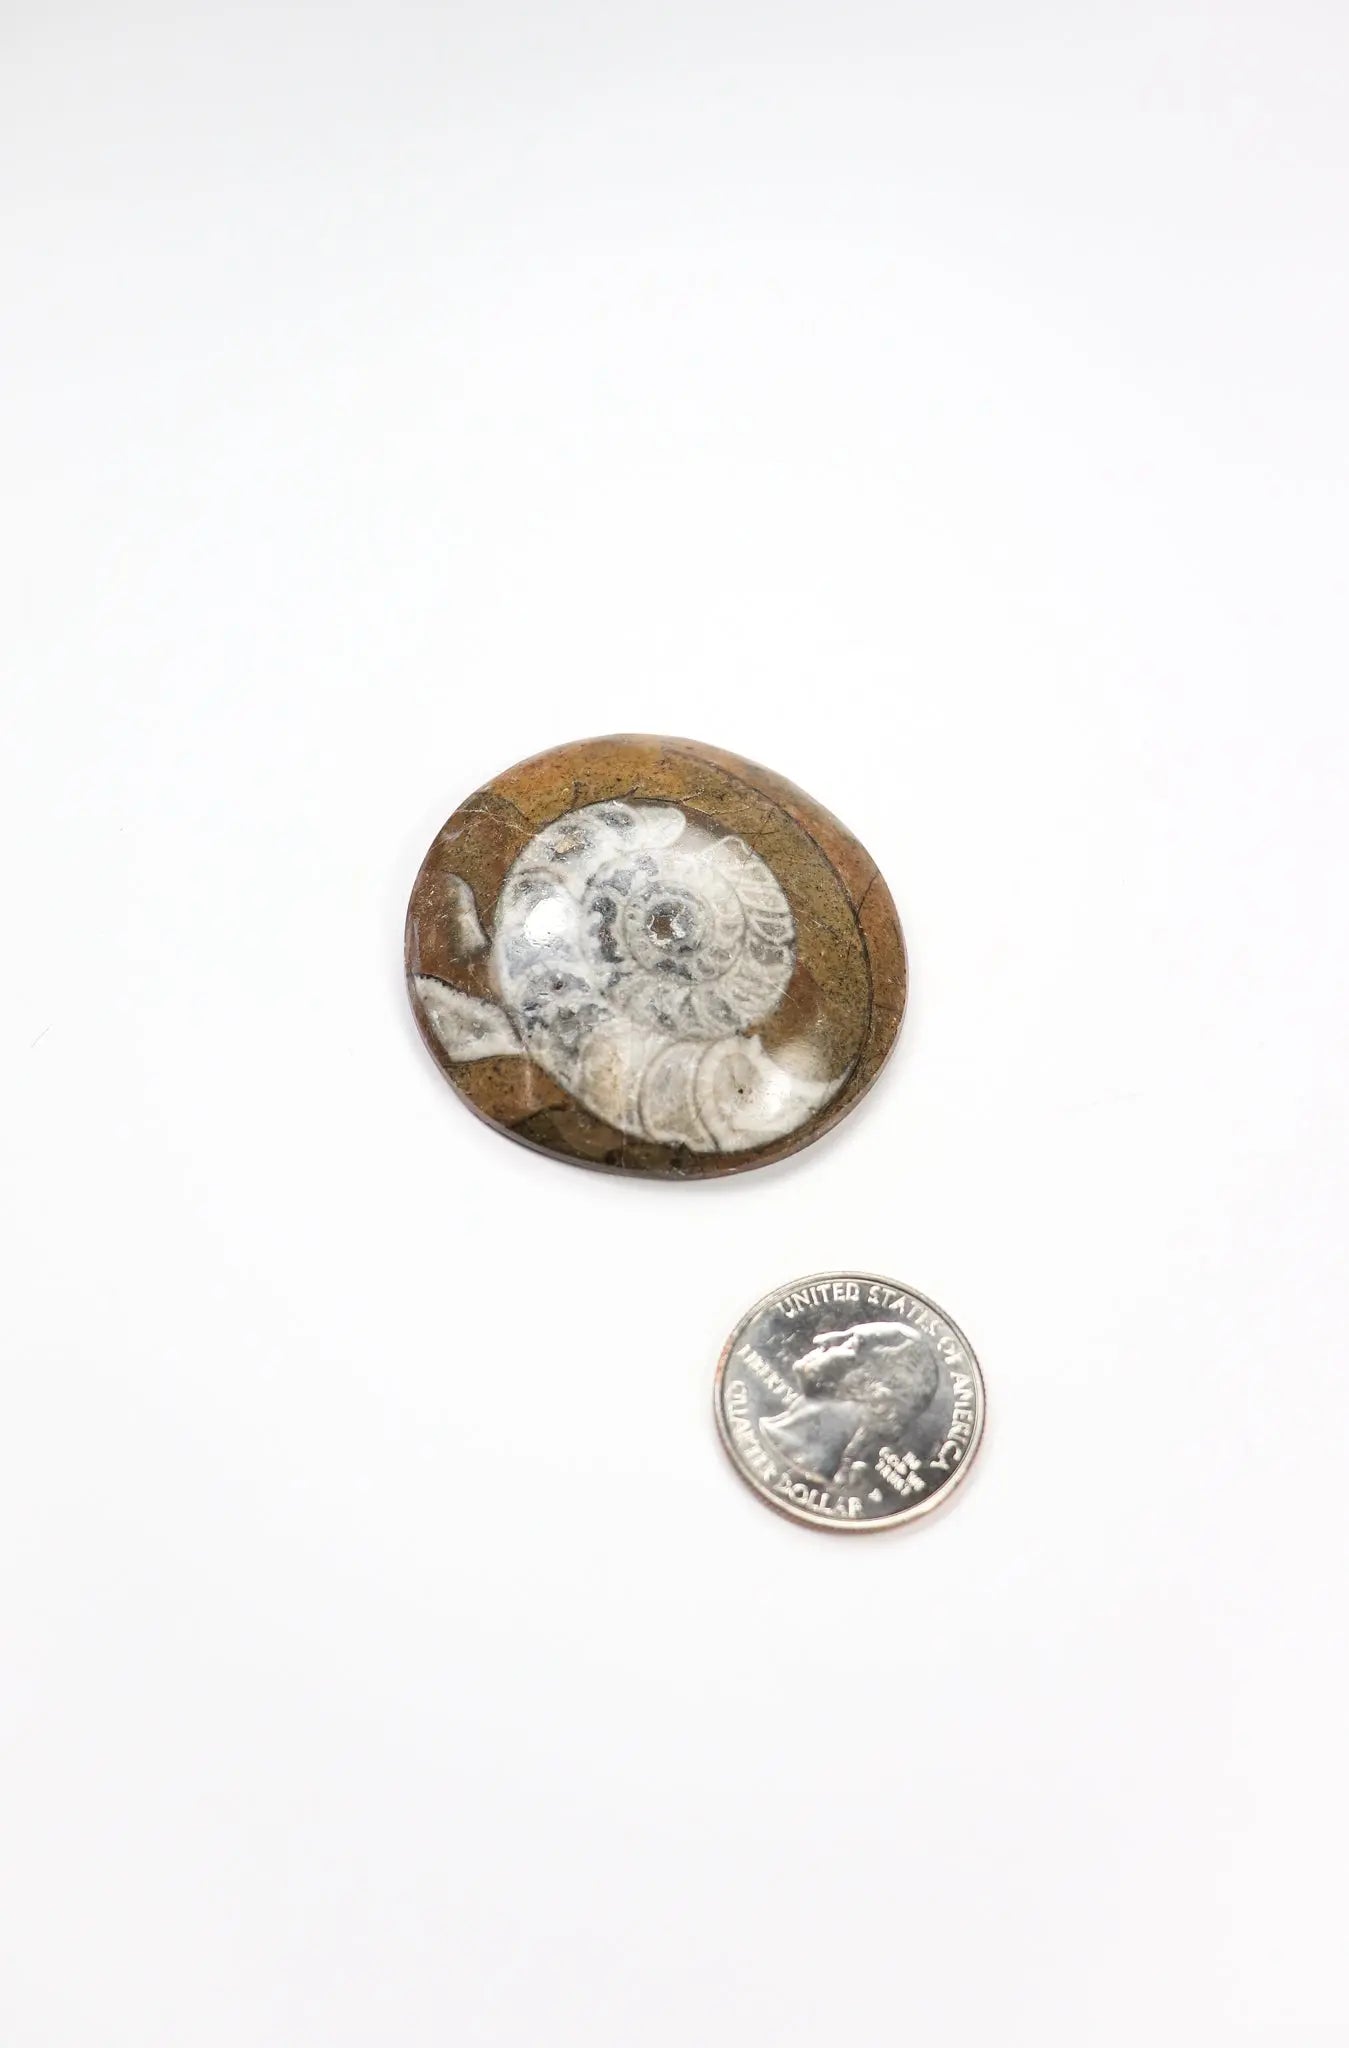 Goniatite Fossil - THE STEMCELL SCIENCE SHOP